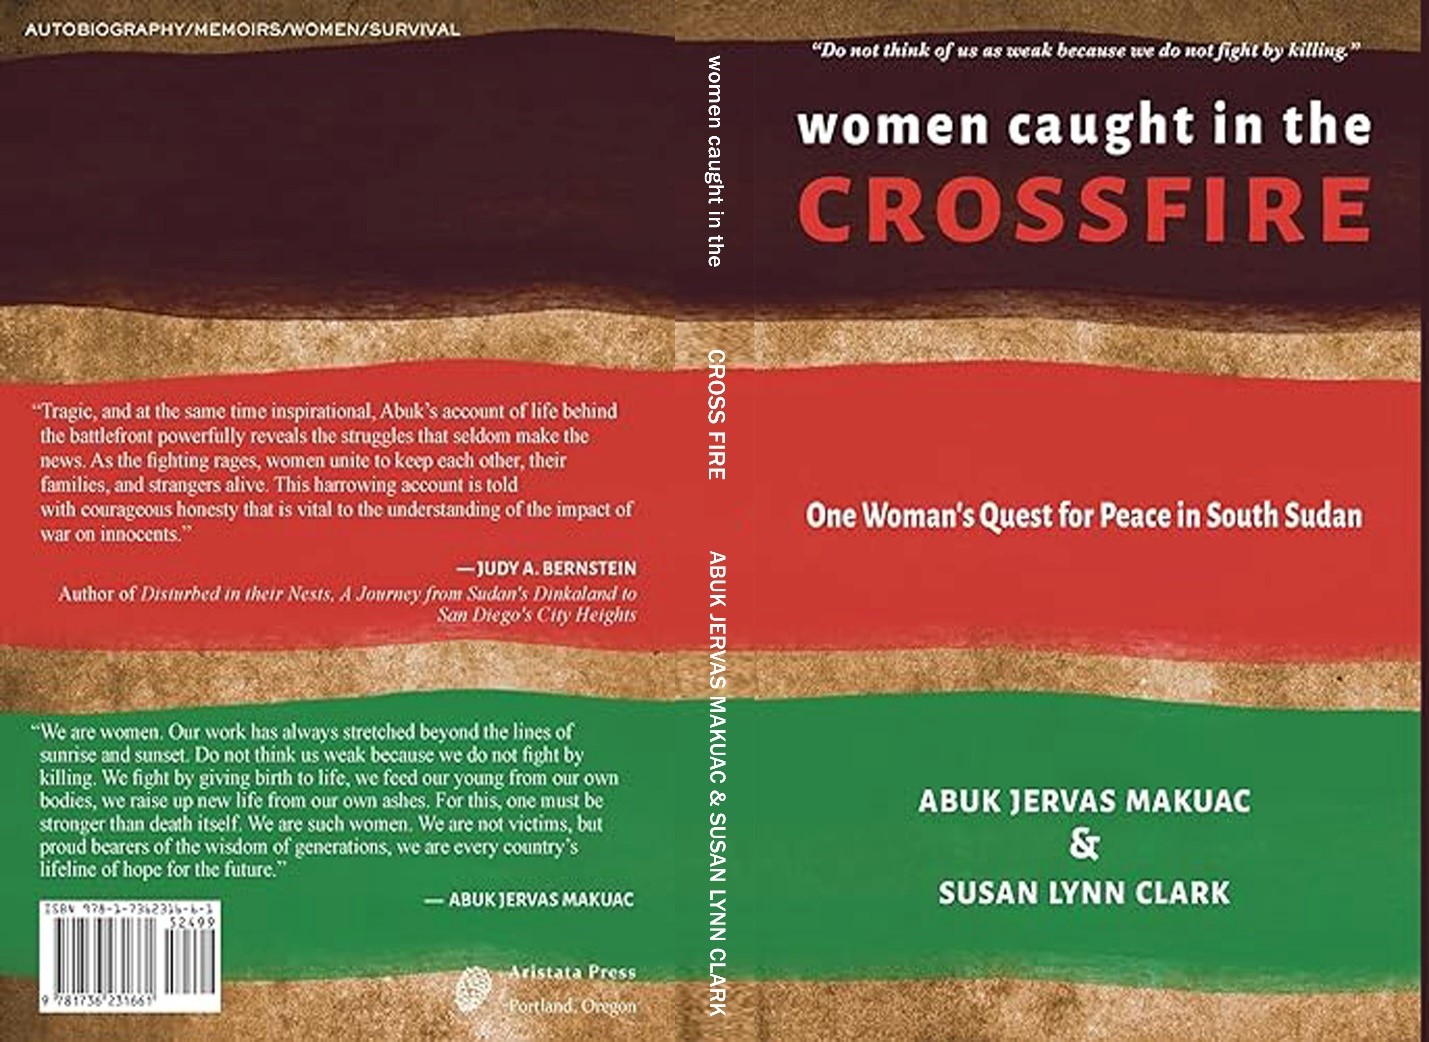 Captivating New Memoir "Women Caught in the Crossfire" Chronicles the Power of Female Resilience in South Sudan’s Many Times of War